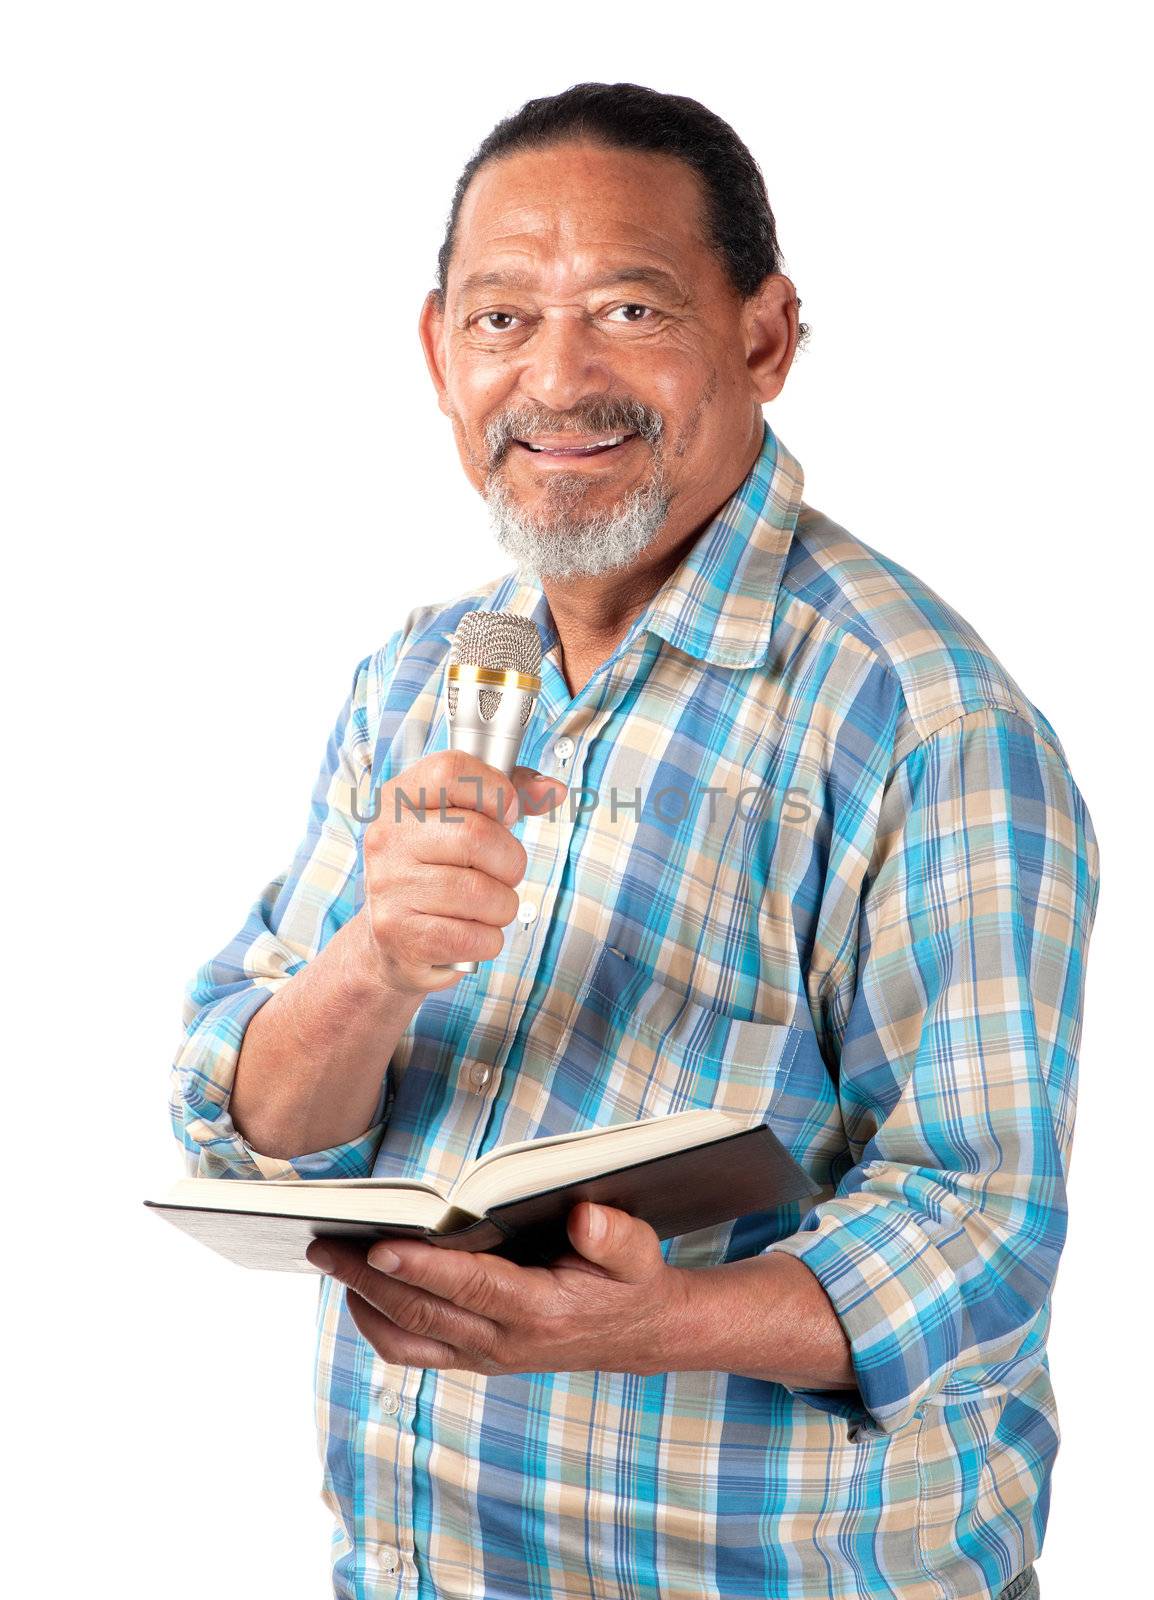 A senior preacher with a microphone and book appears as happy as can be.